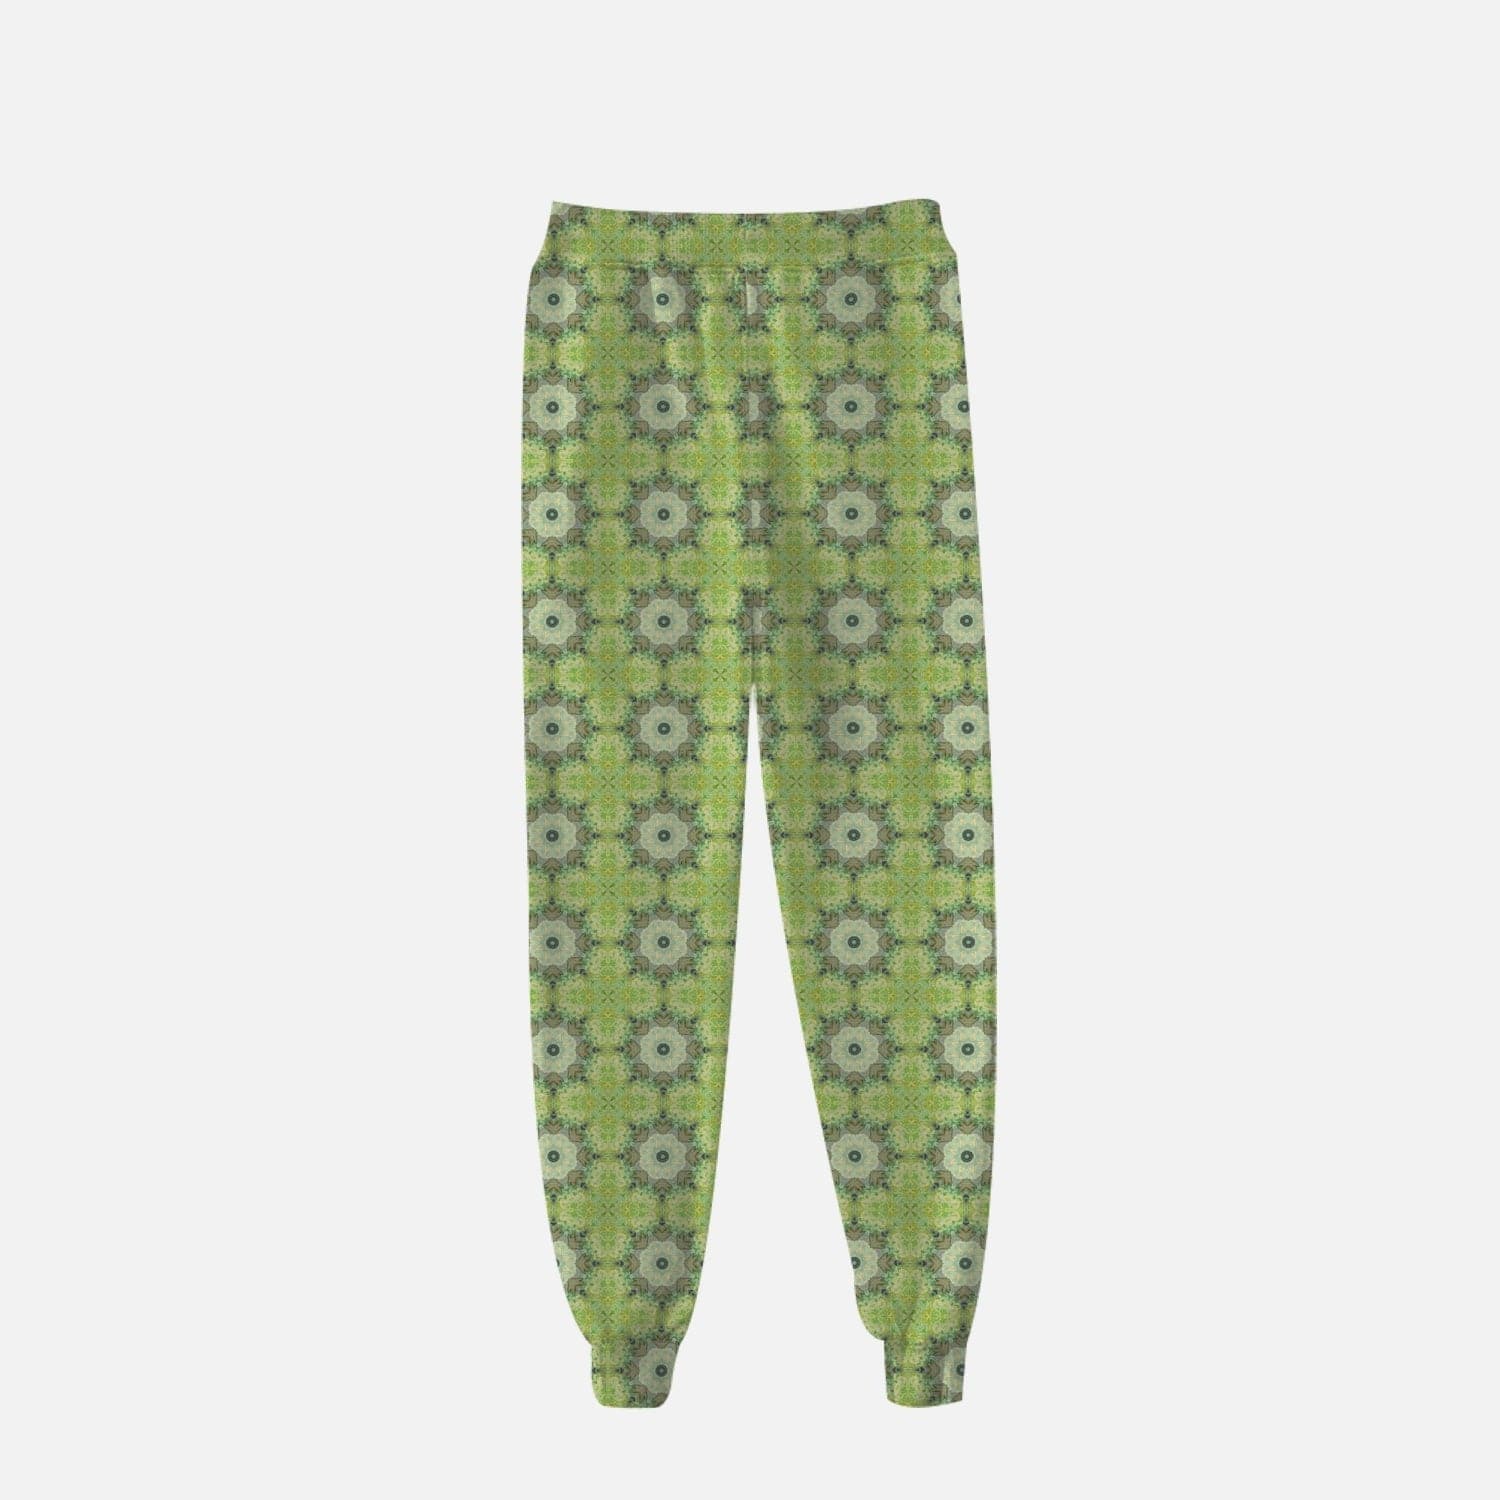 Spring soft green and beige star pattern, trendy 2022 Mid-Rise Pocket Sweatpants, by Sensus Studio Design